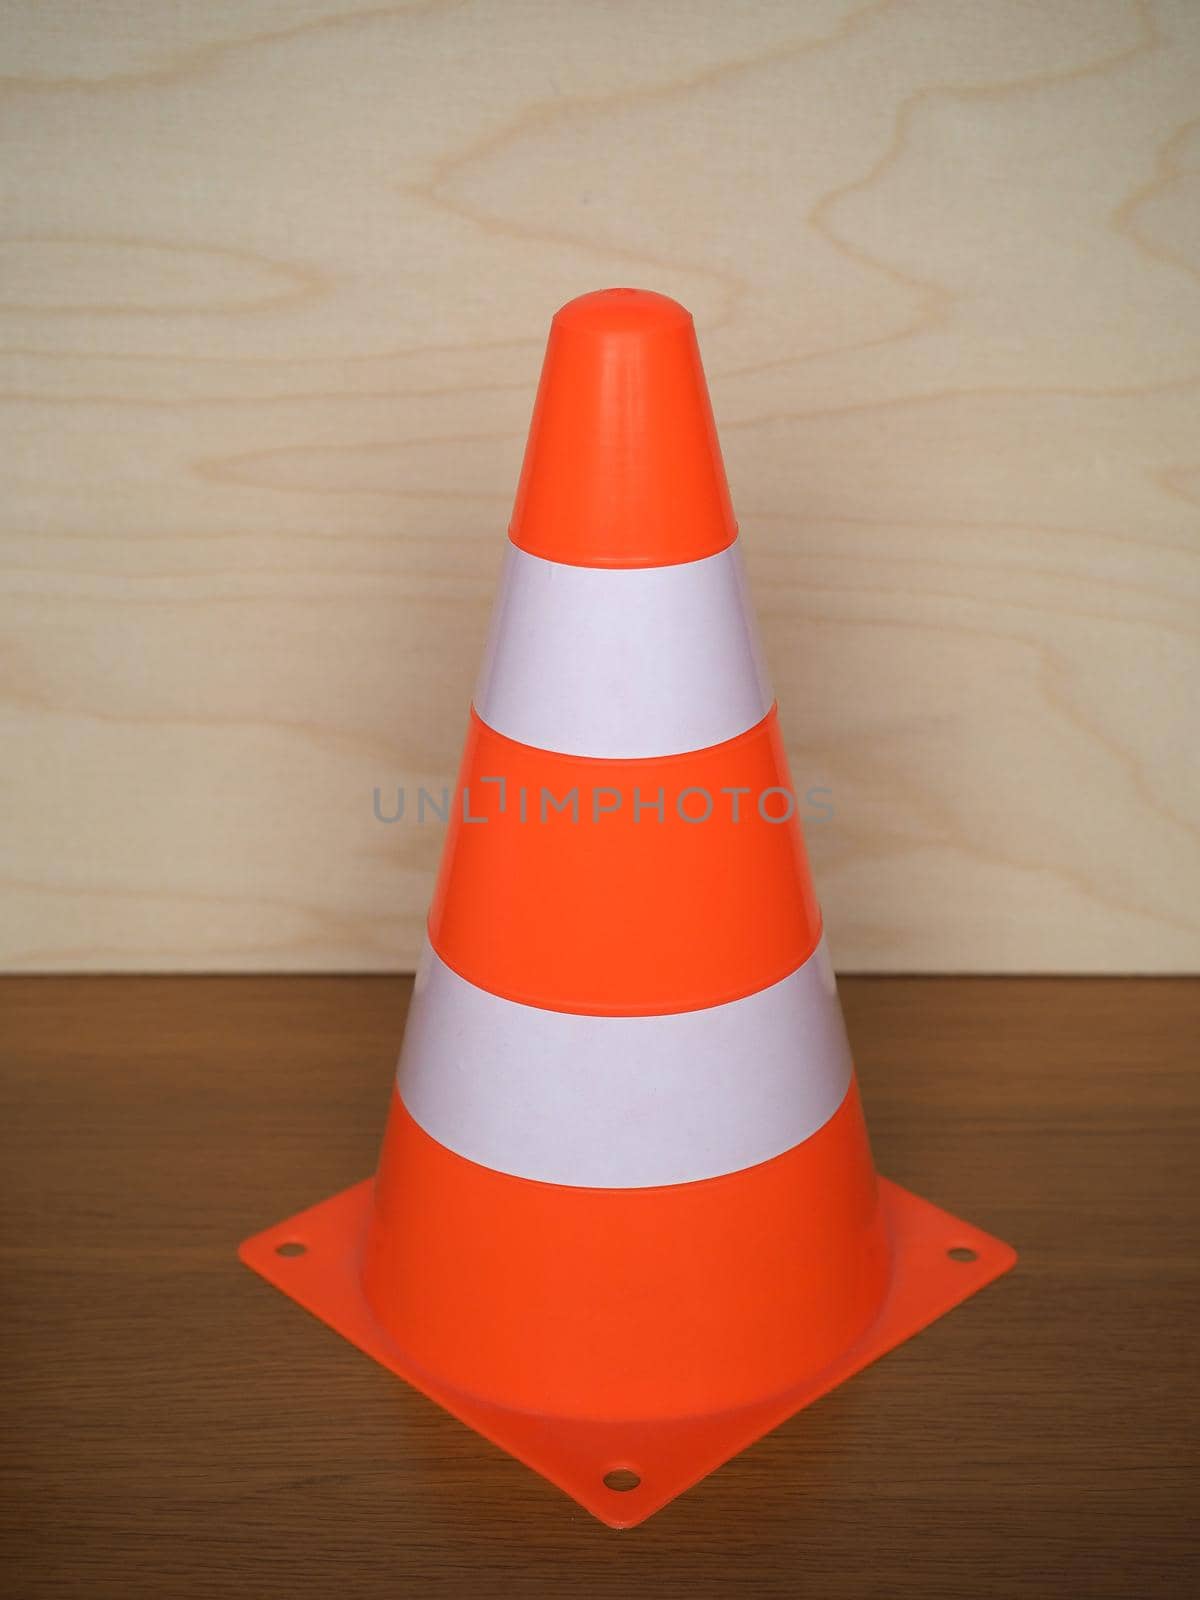 traffic cone to mark road works or temporary obstruction